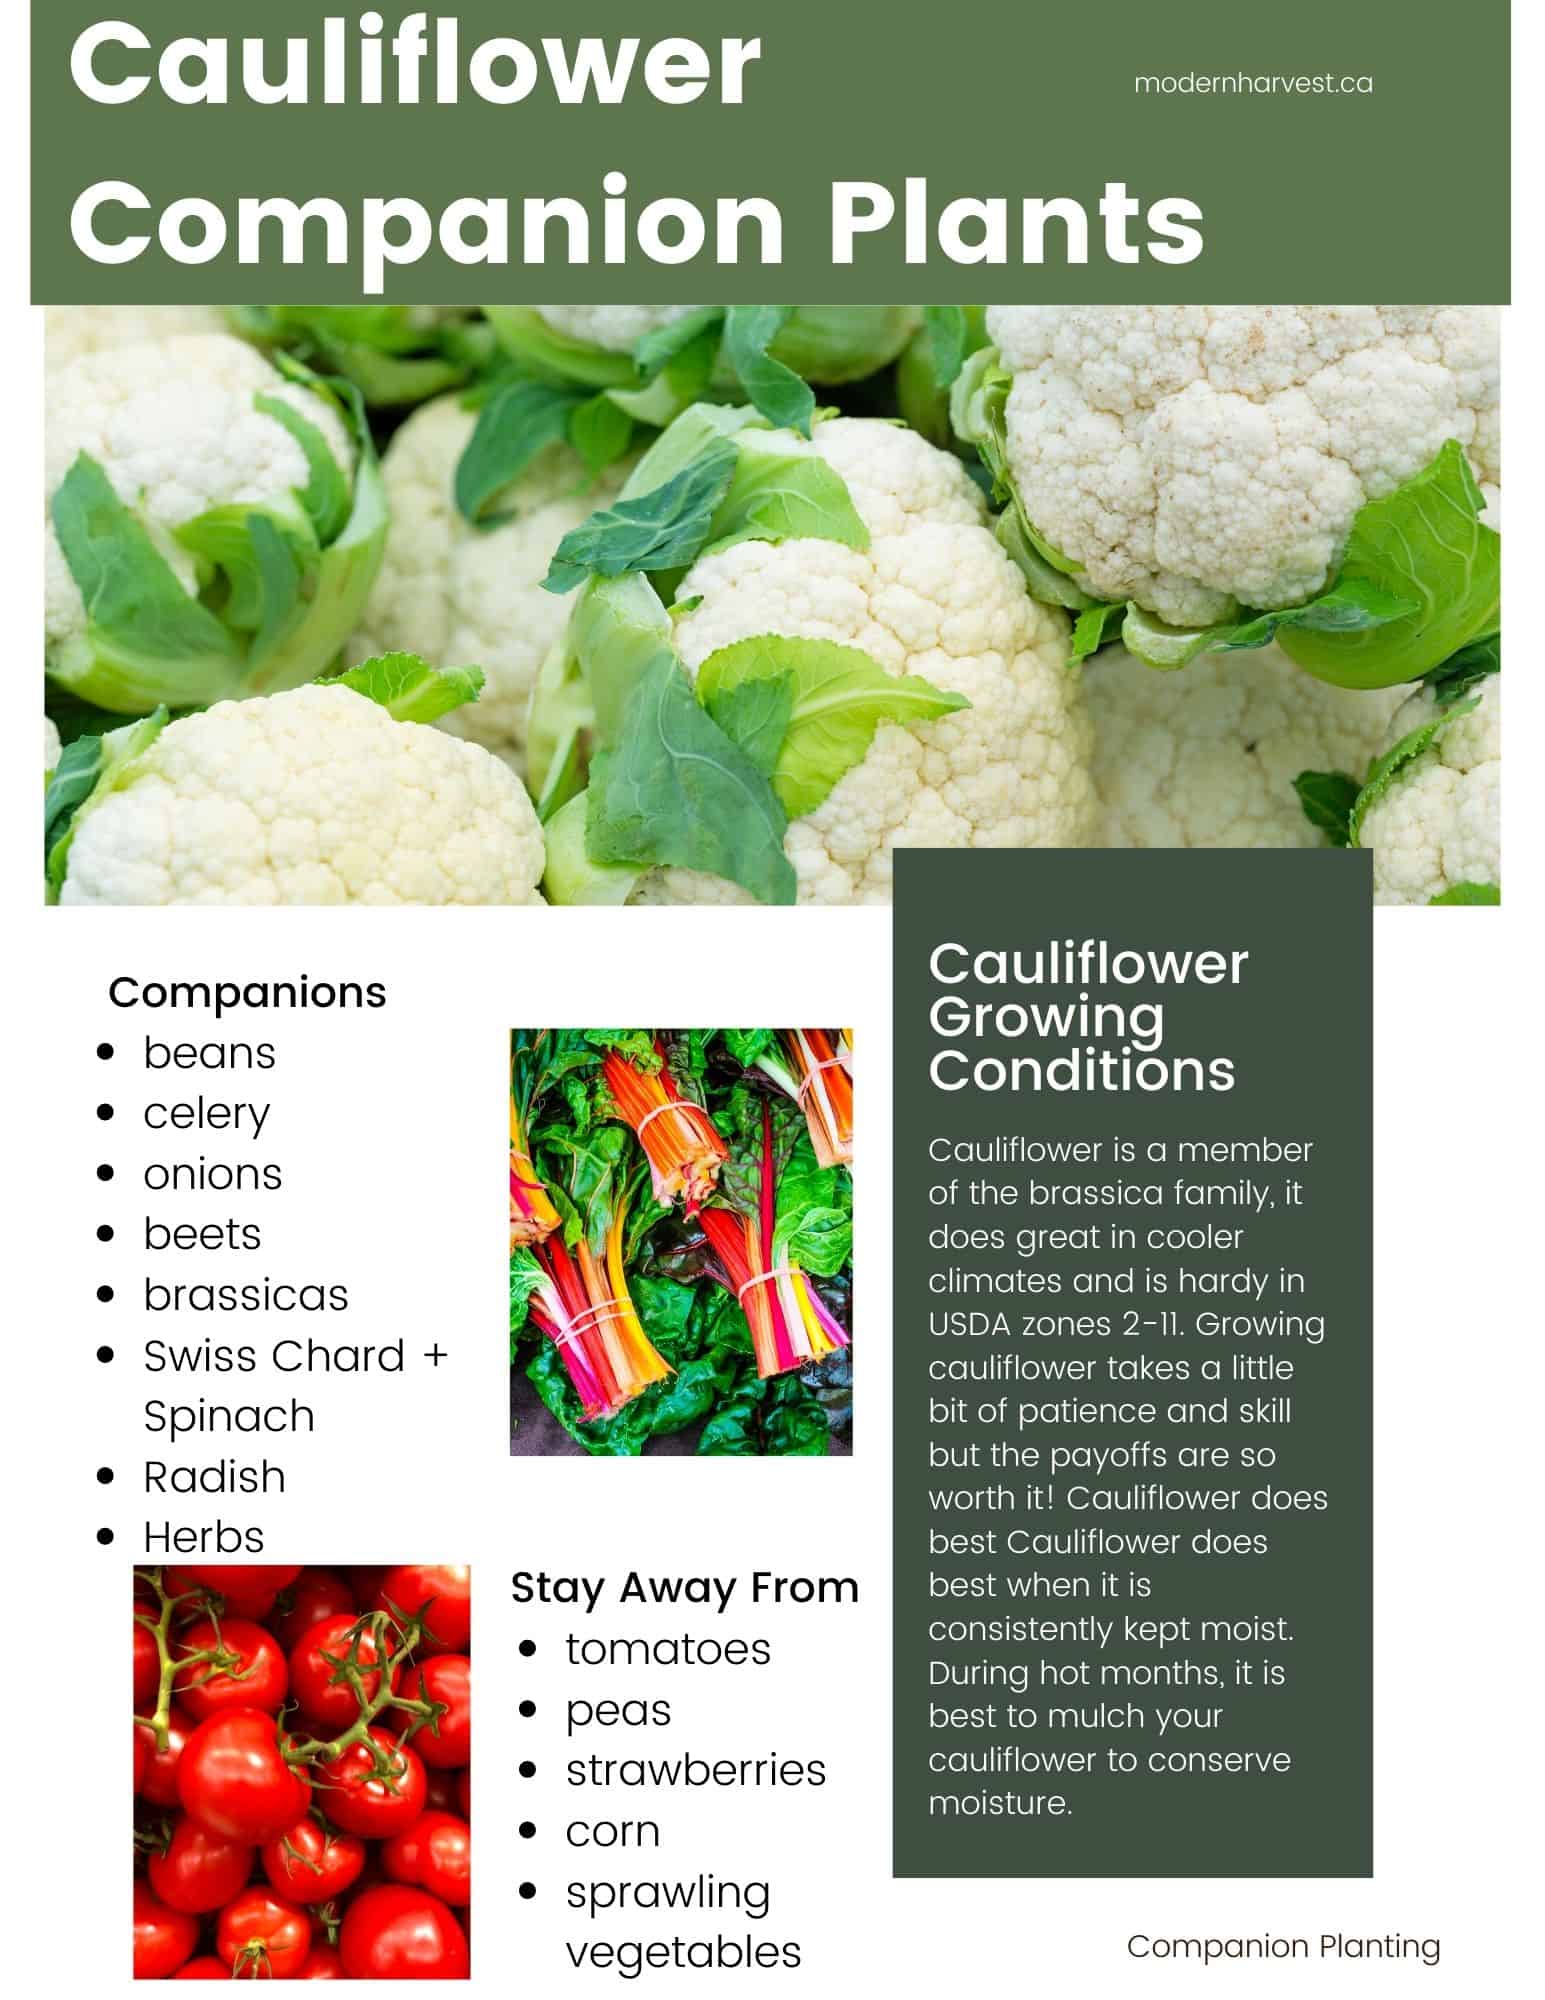 Califlower companion planting guide including companions and enemies.